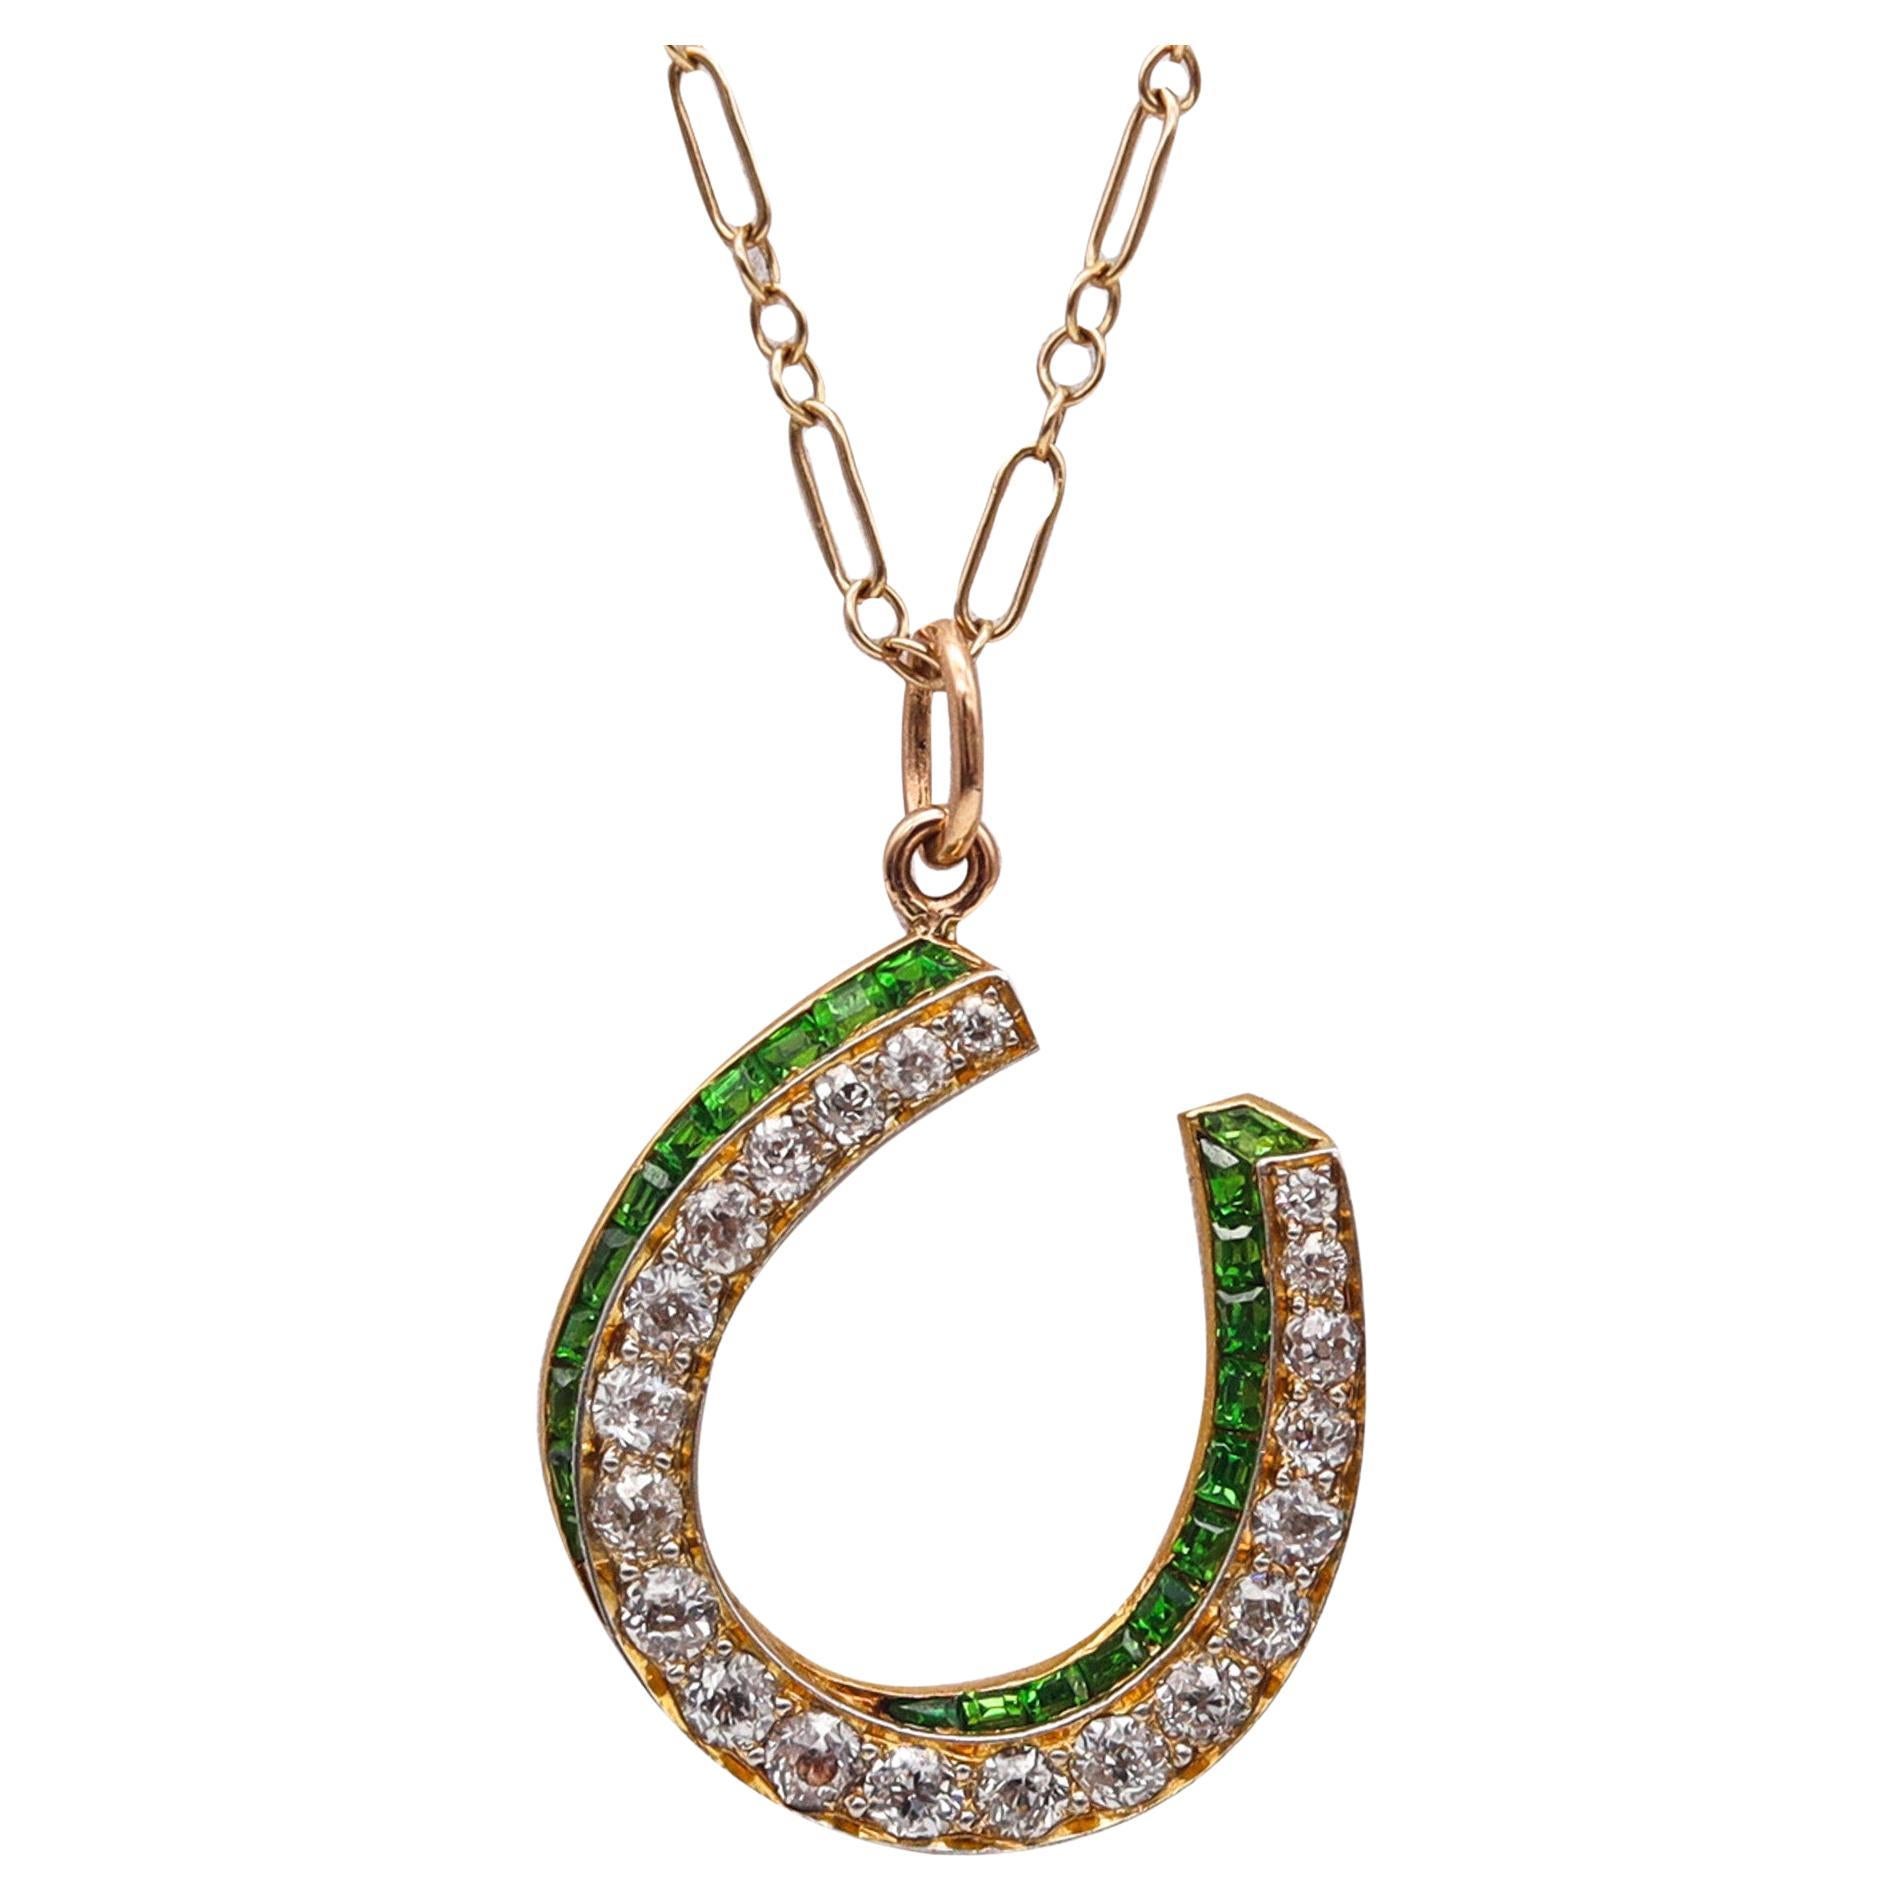 Edwardian 1900 Horseshoe Lucky Pendant In 18Kt Gold With Demantoids And Diamonds